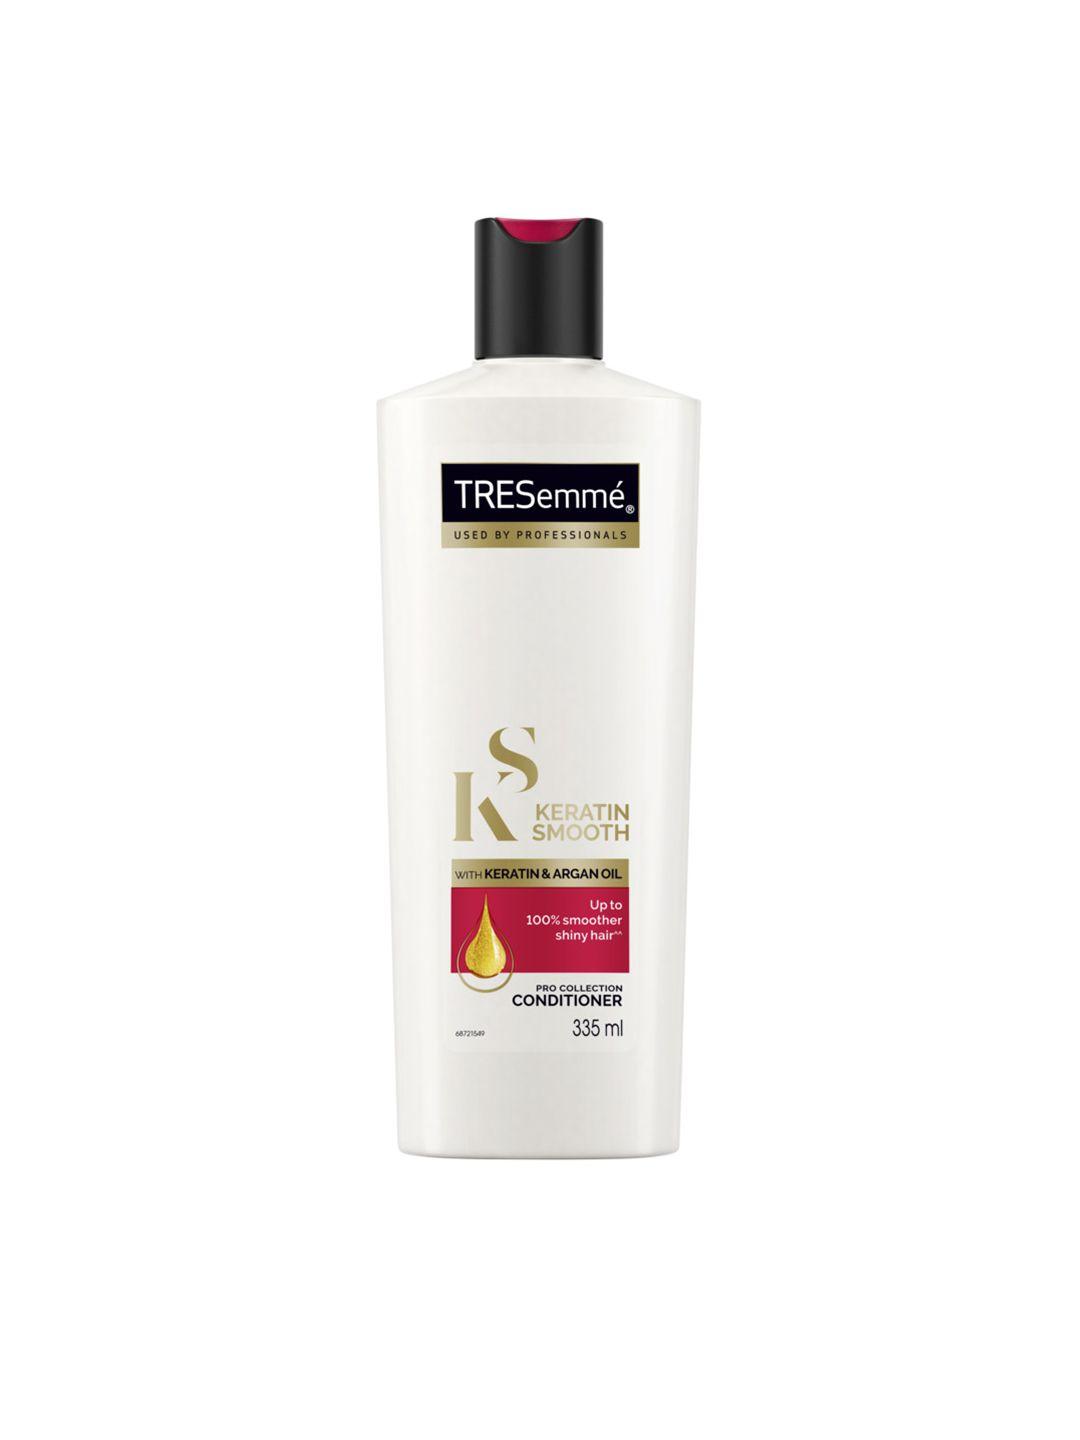 tresemme keratin smooth conditioner 340 ml